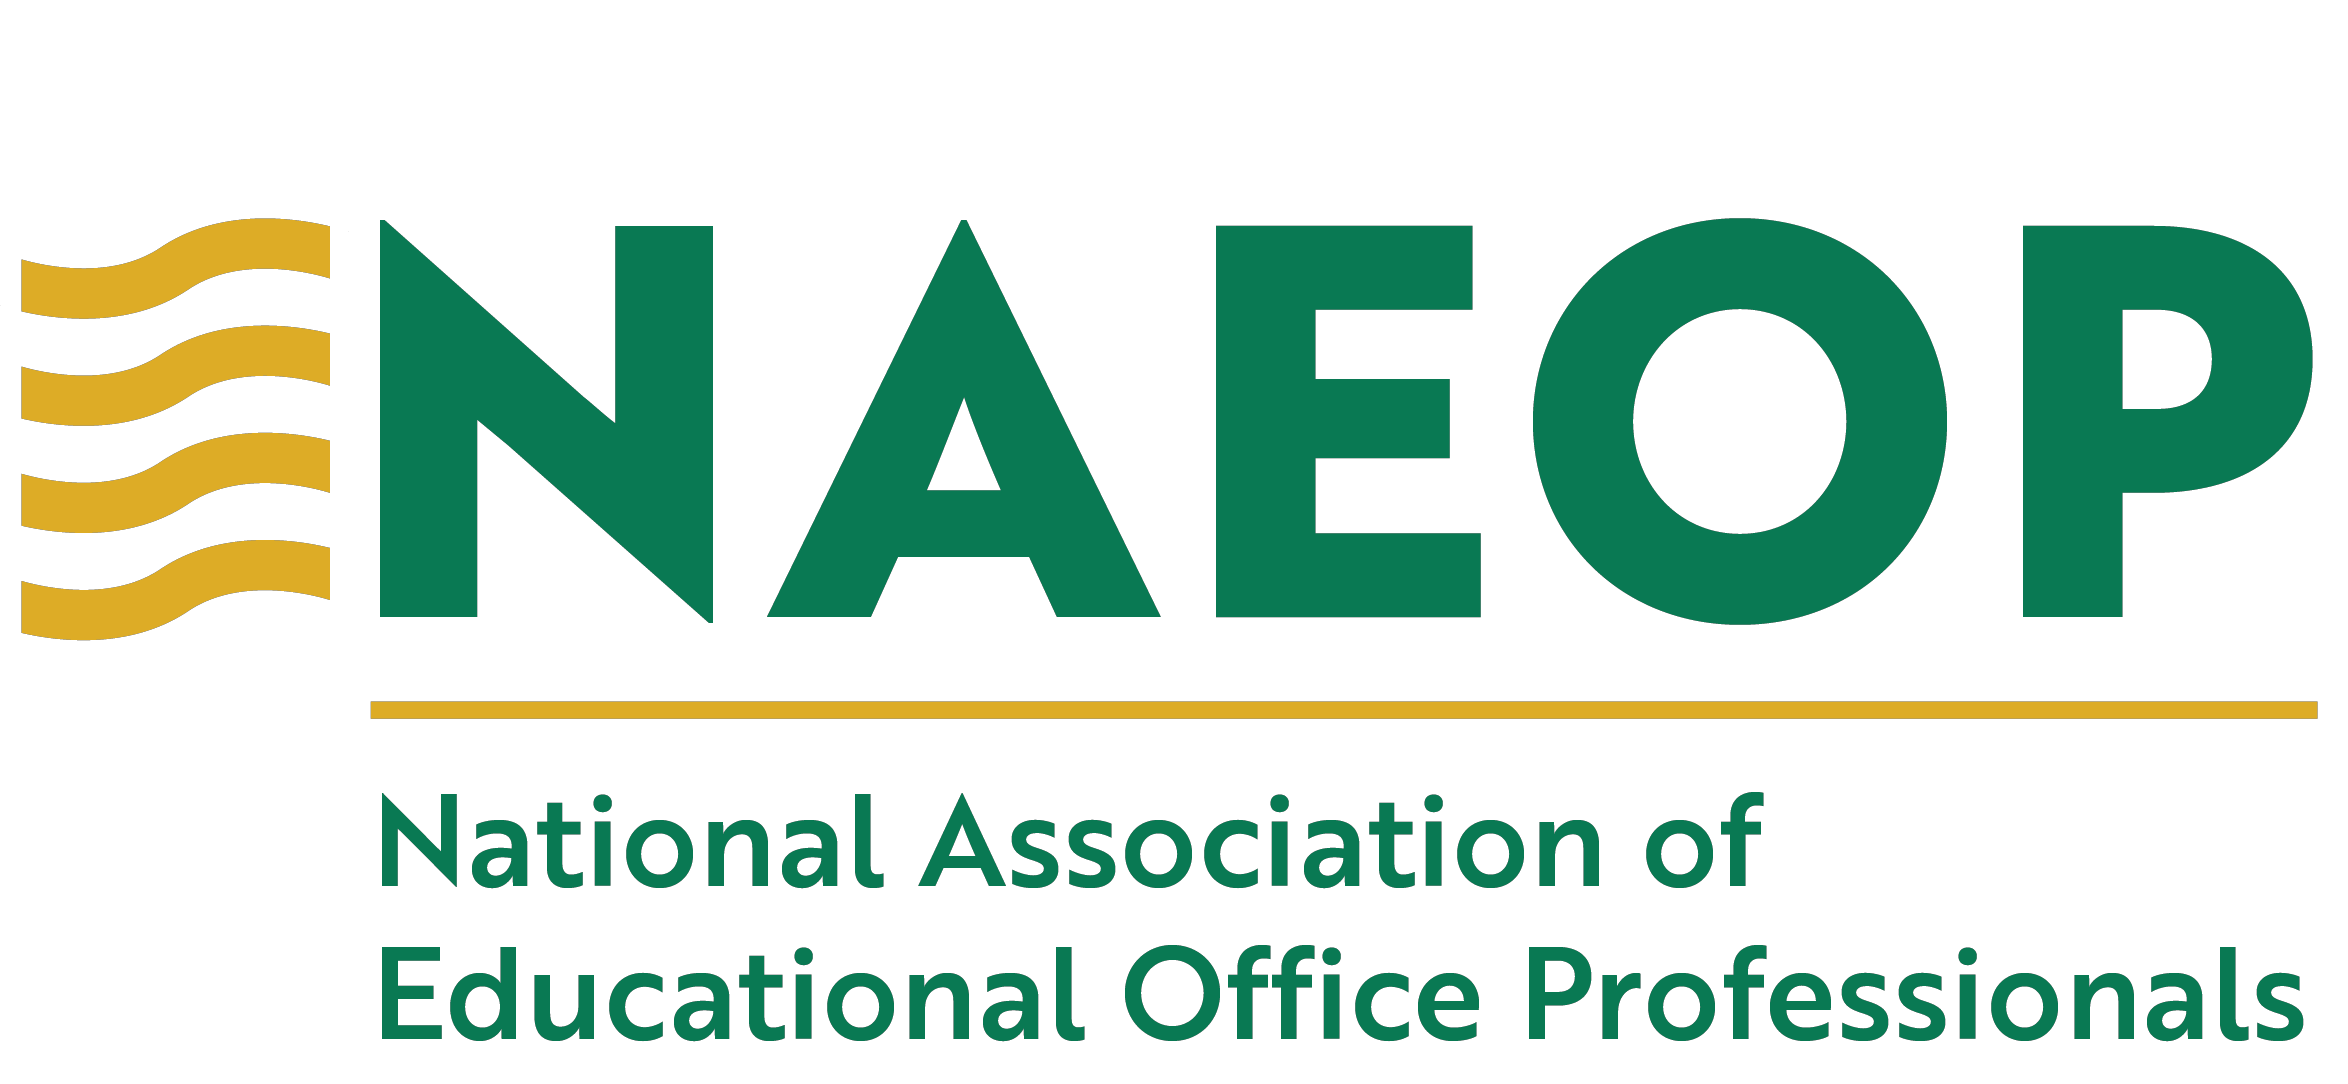 NATIONAL ASSOCIATION OF EDUCATIONAL OFFICE PROFESSIONALS